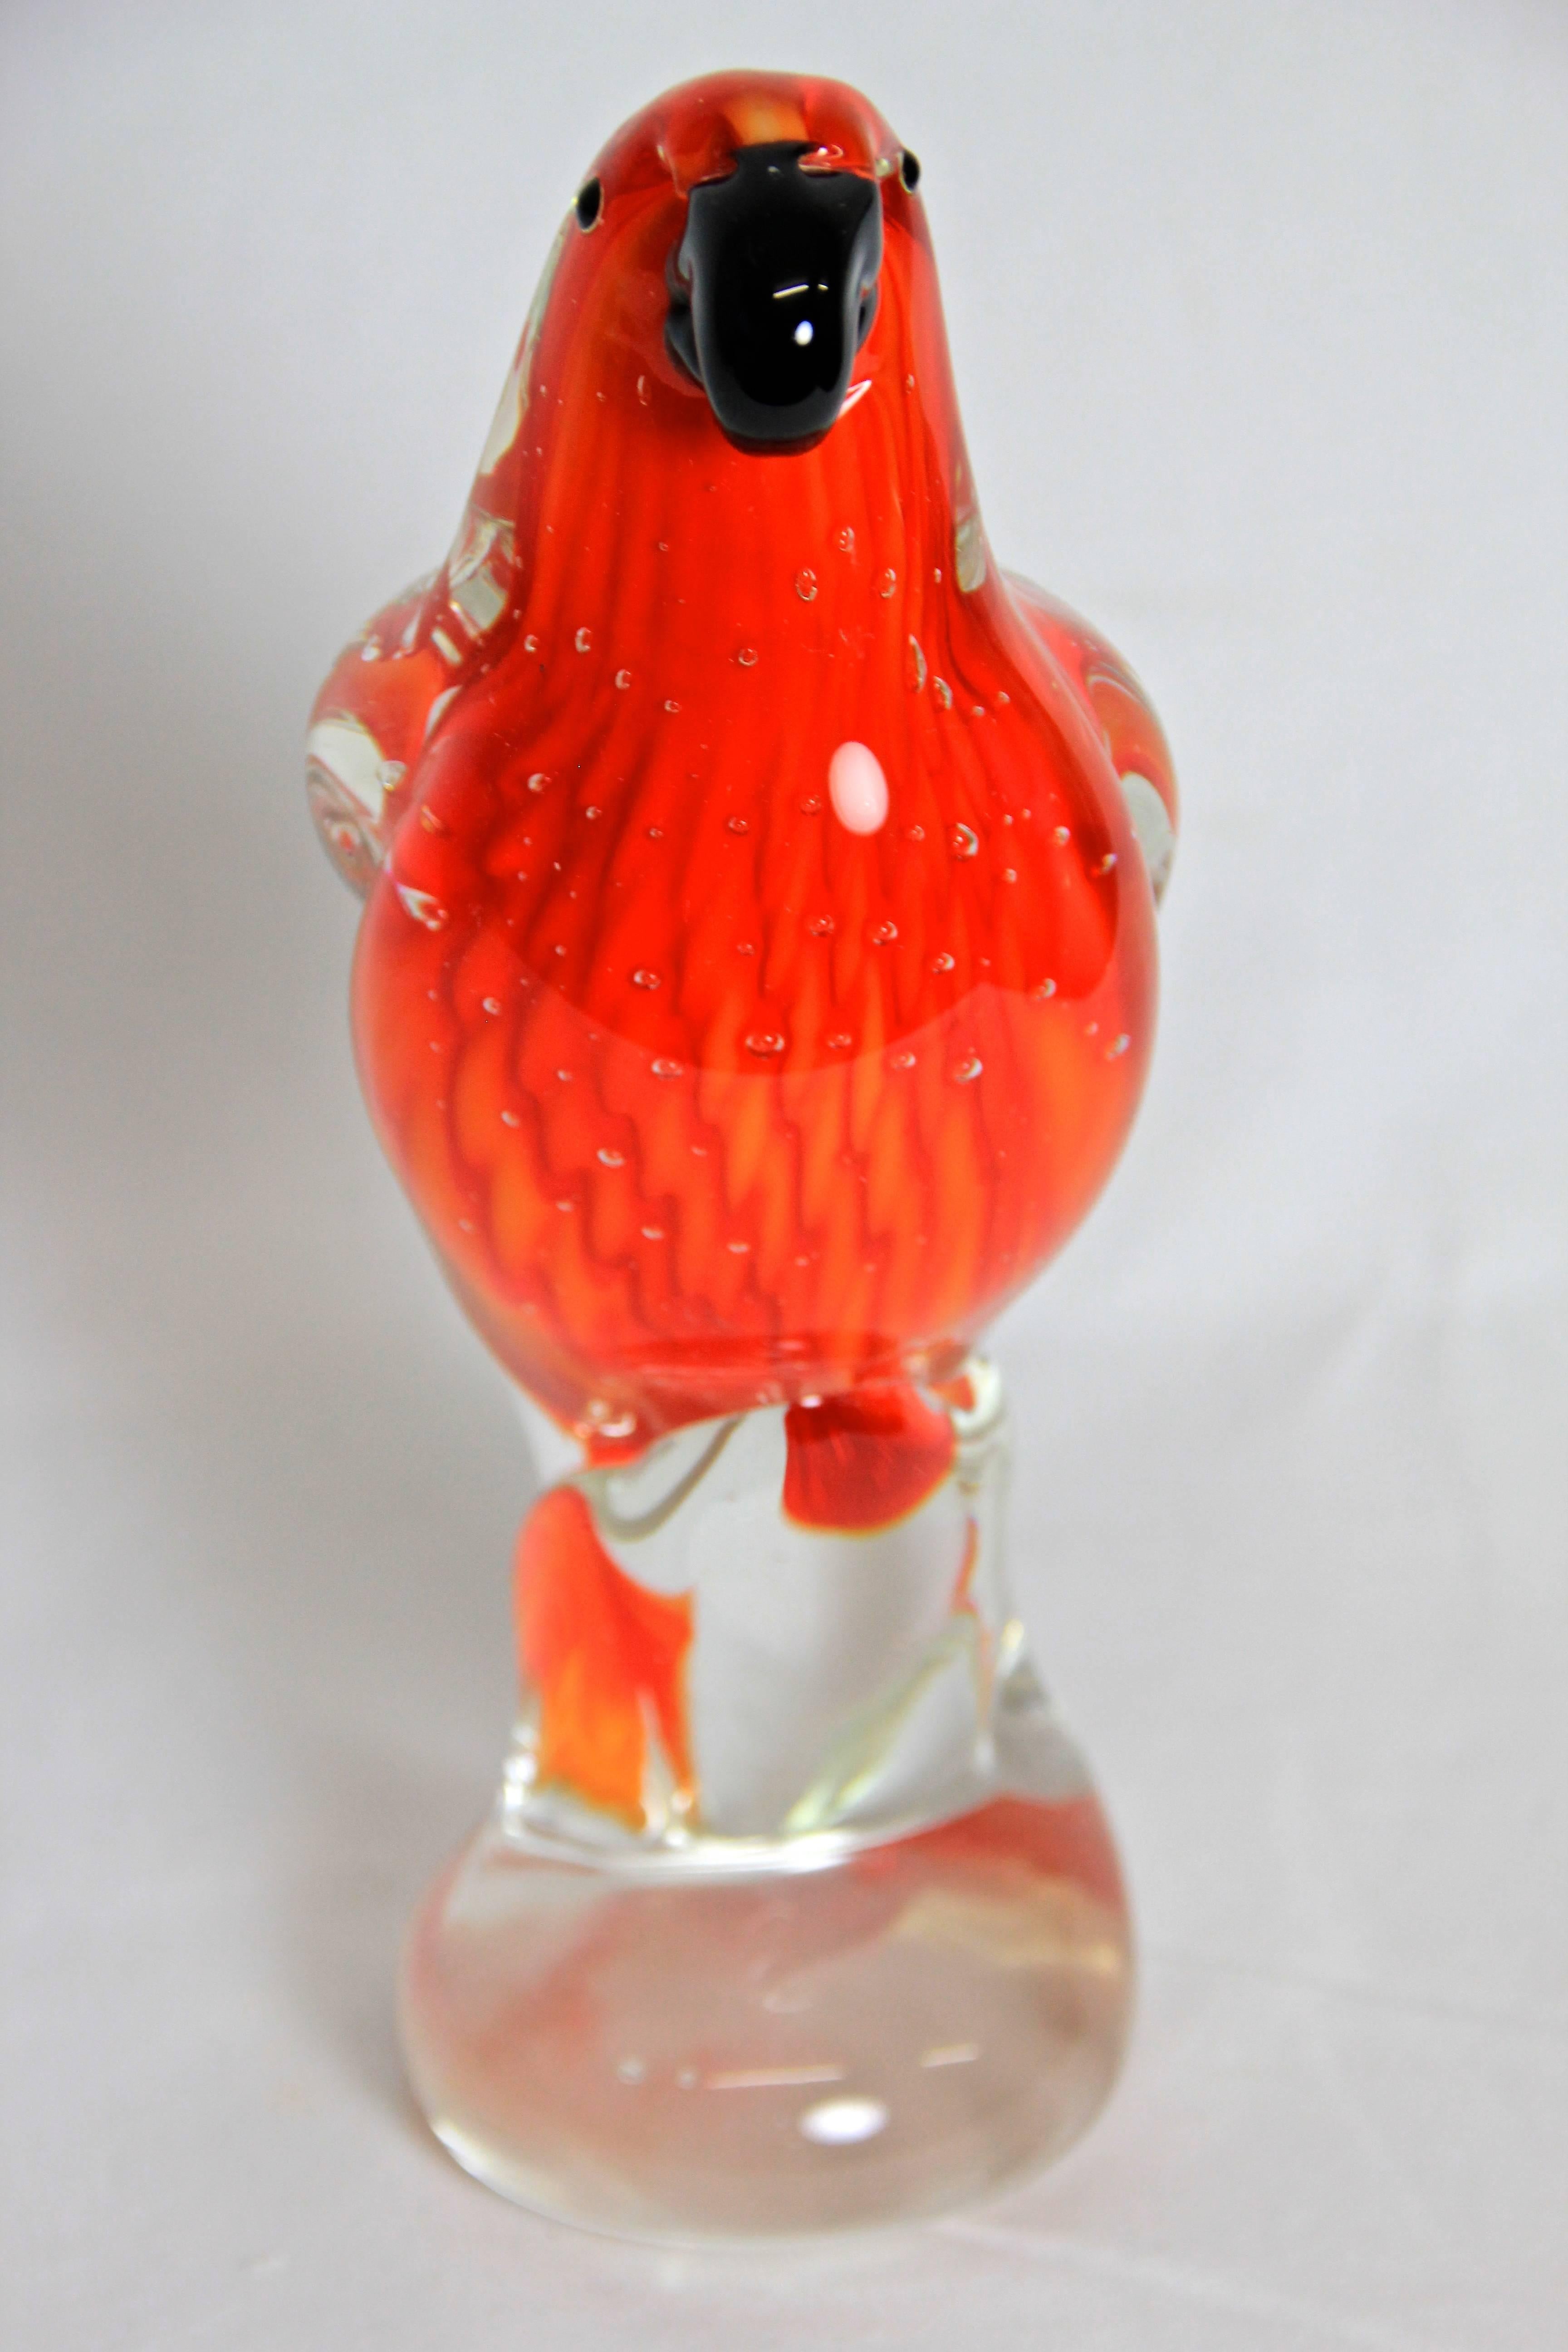 In this selection we are offering you eight properly selected Murano Glass Art pieces in absolute excellent quality. Every connoisseur or collector will know what we are talking about!
The last masterpiece in our rare selection is this fine Murano